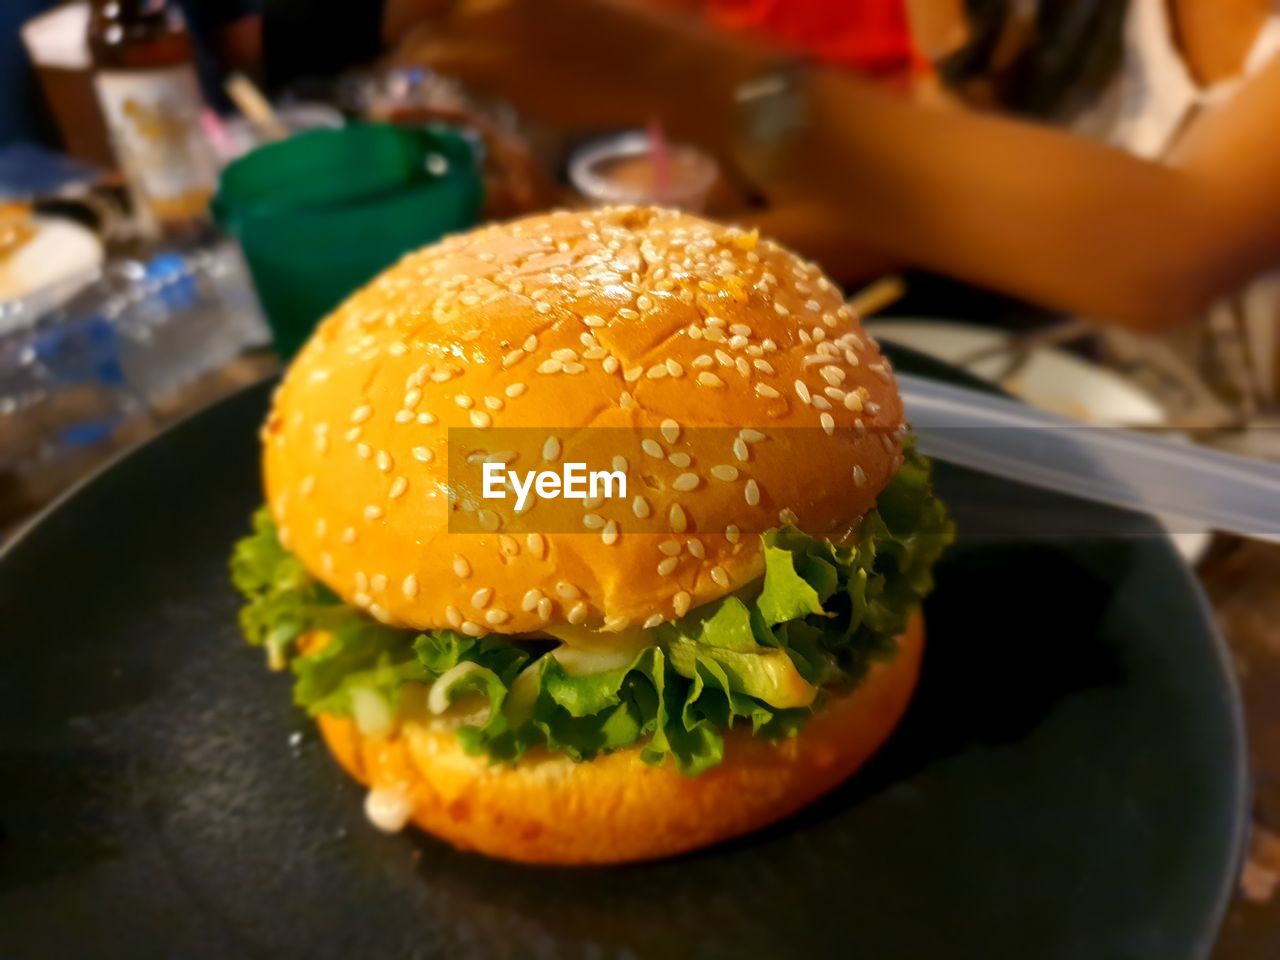 CLOSE-UP OF BURGER ON PLATE